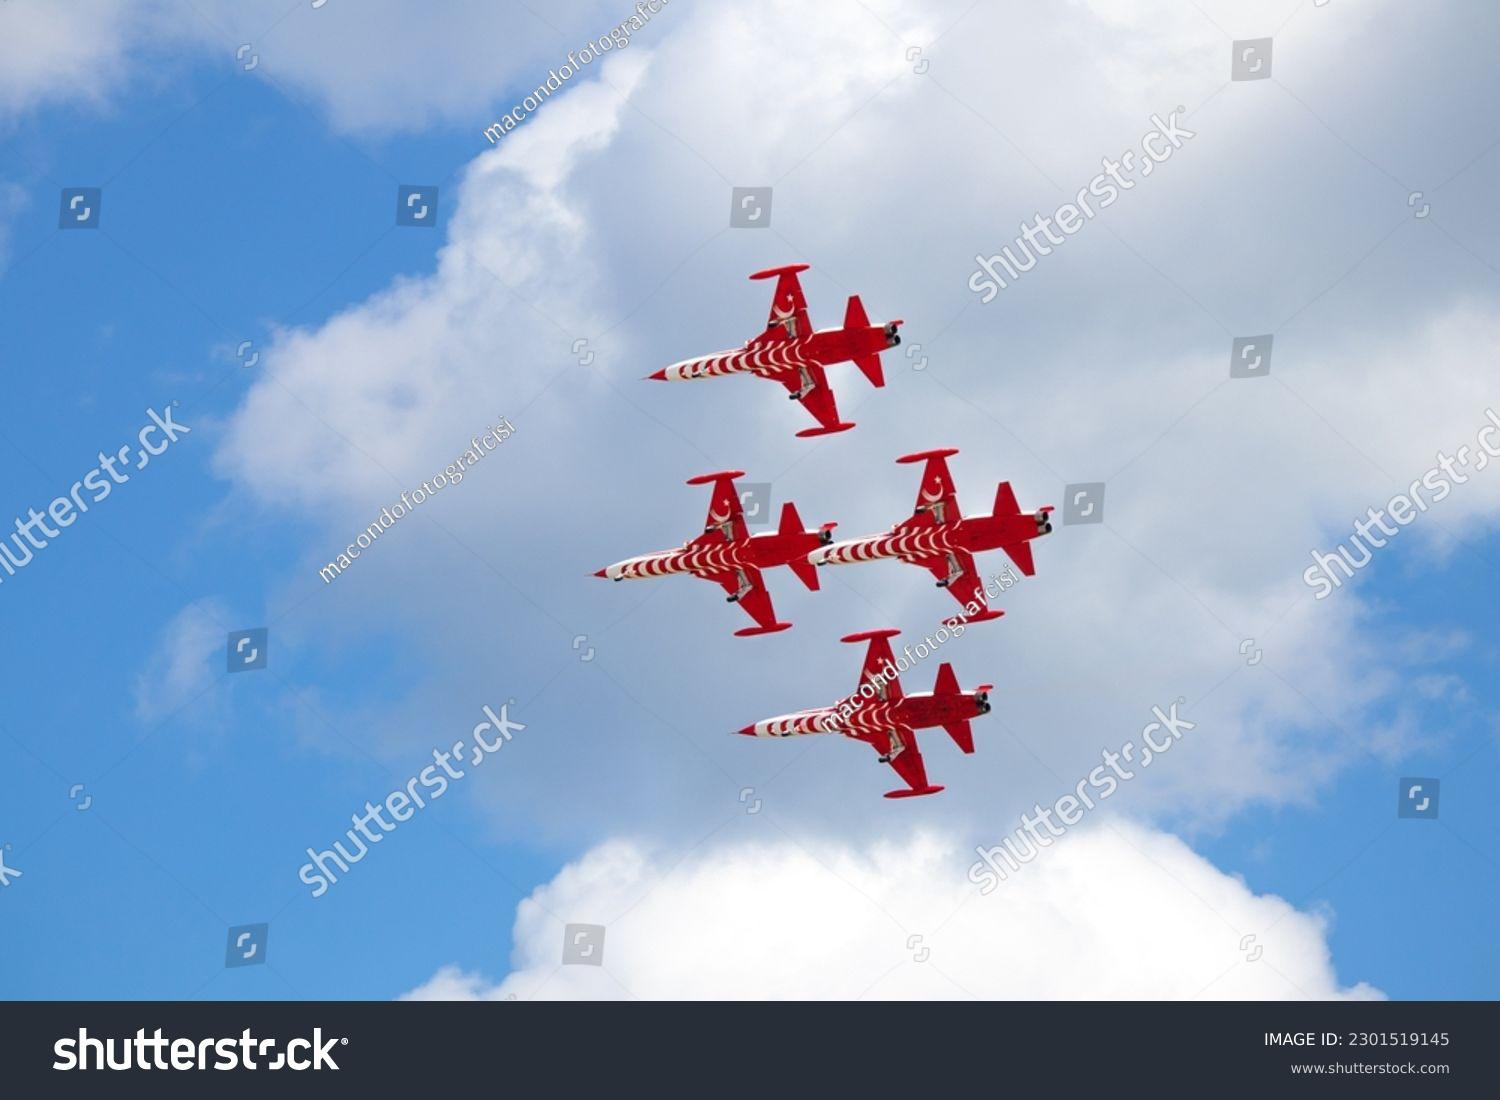 Planes Flying Together Image Stock Photos Vectors